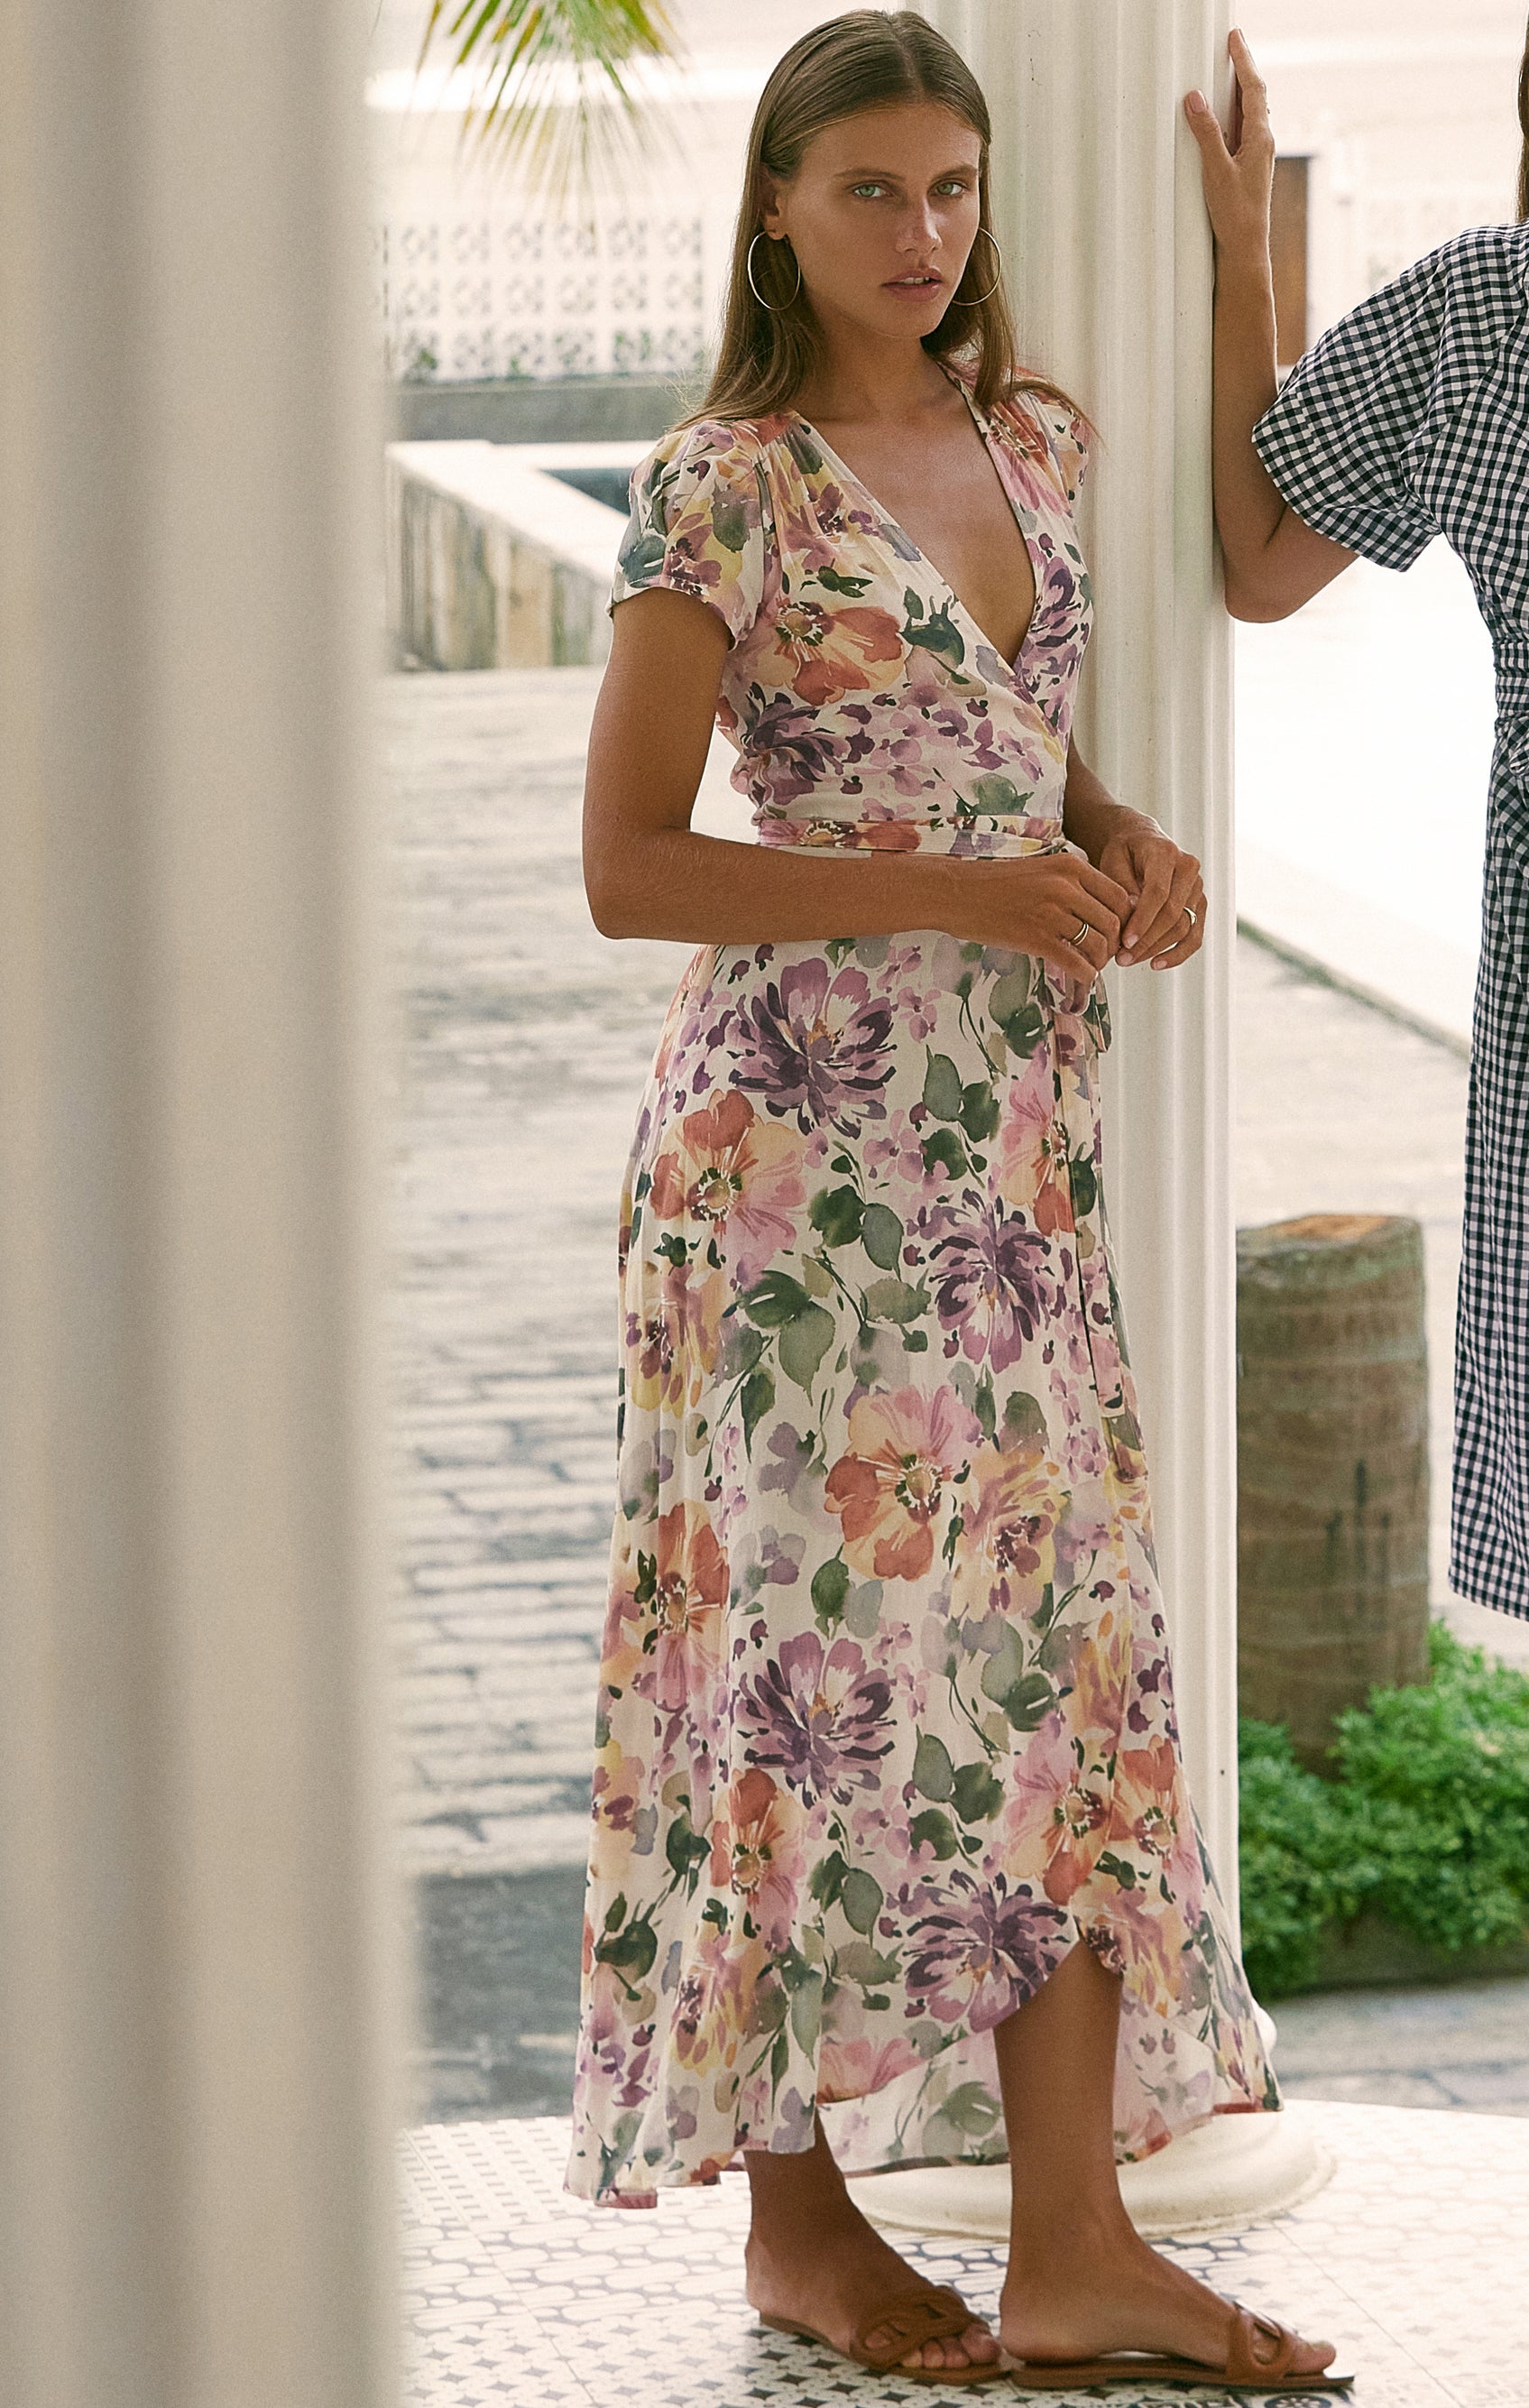 Woman wearing maxi floral wrap dress standing on a porch